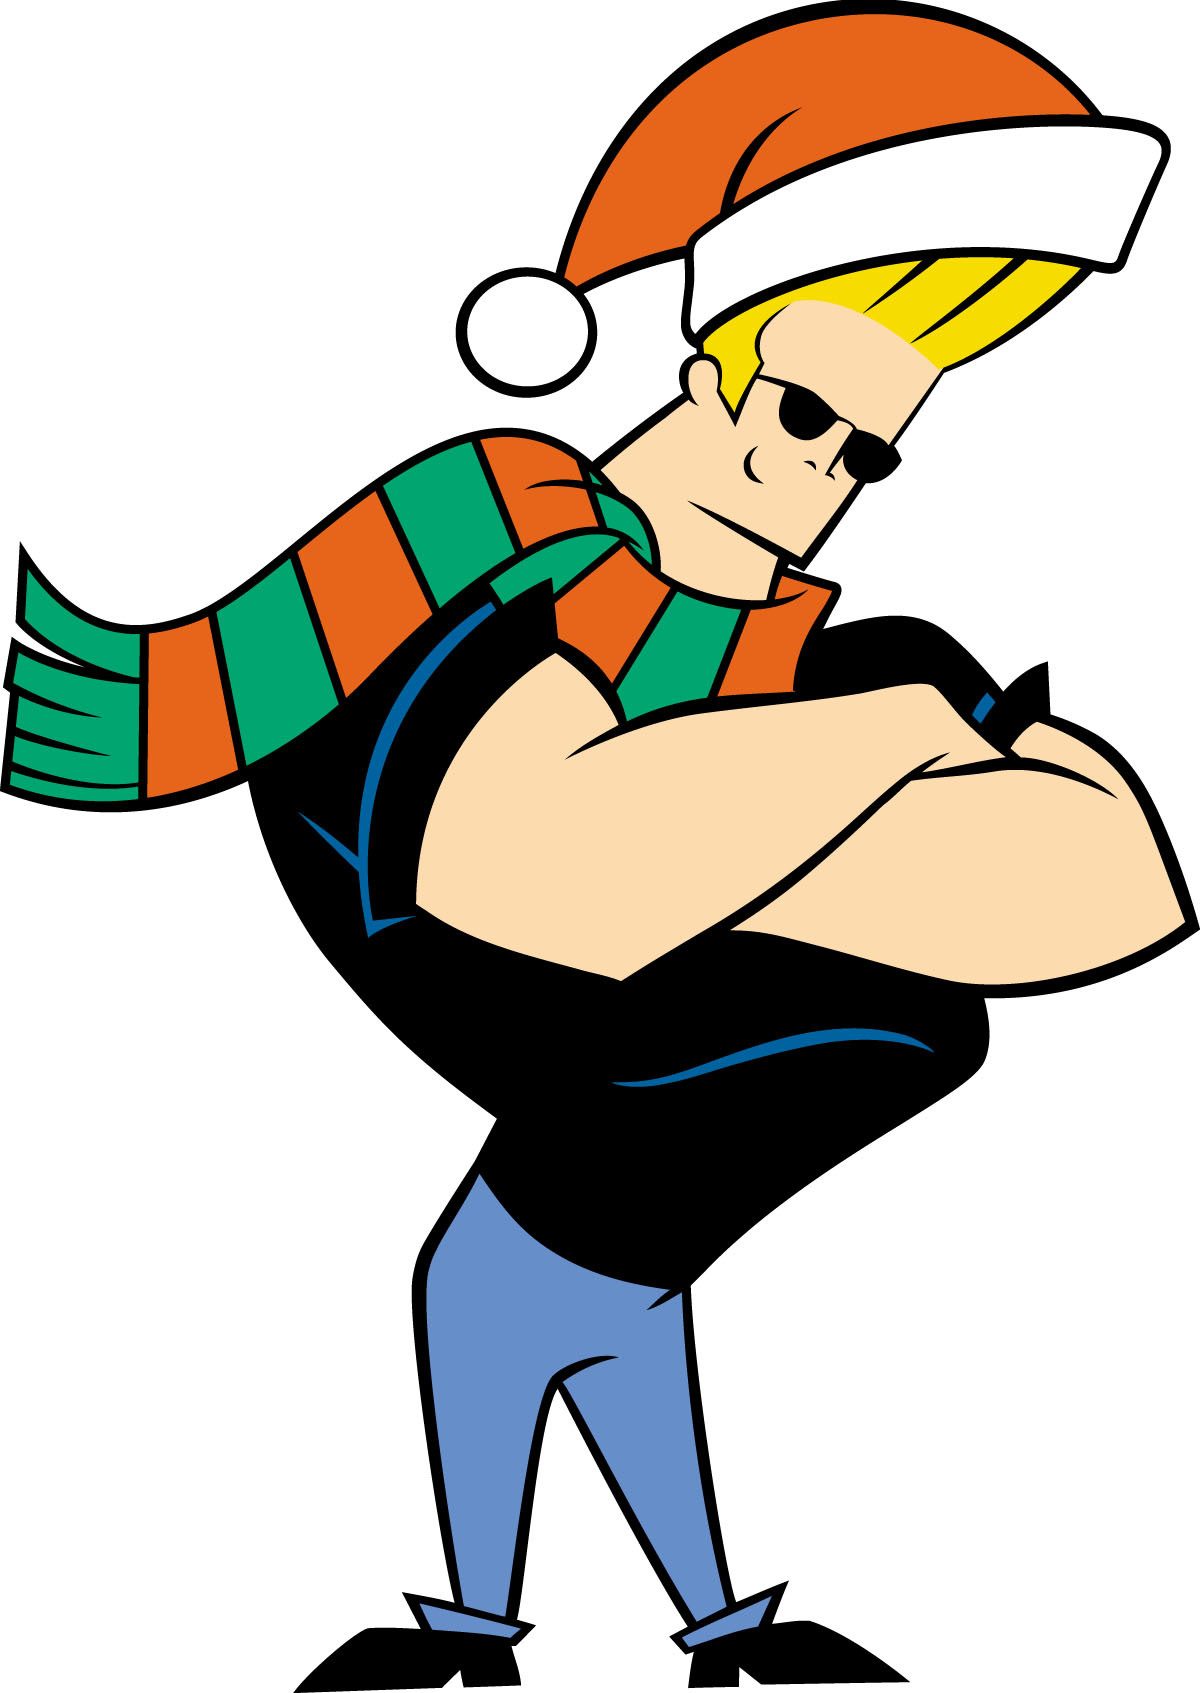 Johnny Bravo happy new year wallpaper | Cartoons HD Wallpapers and ...